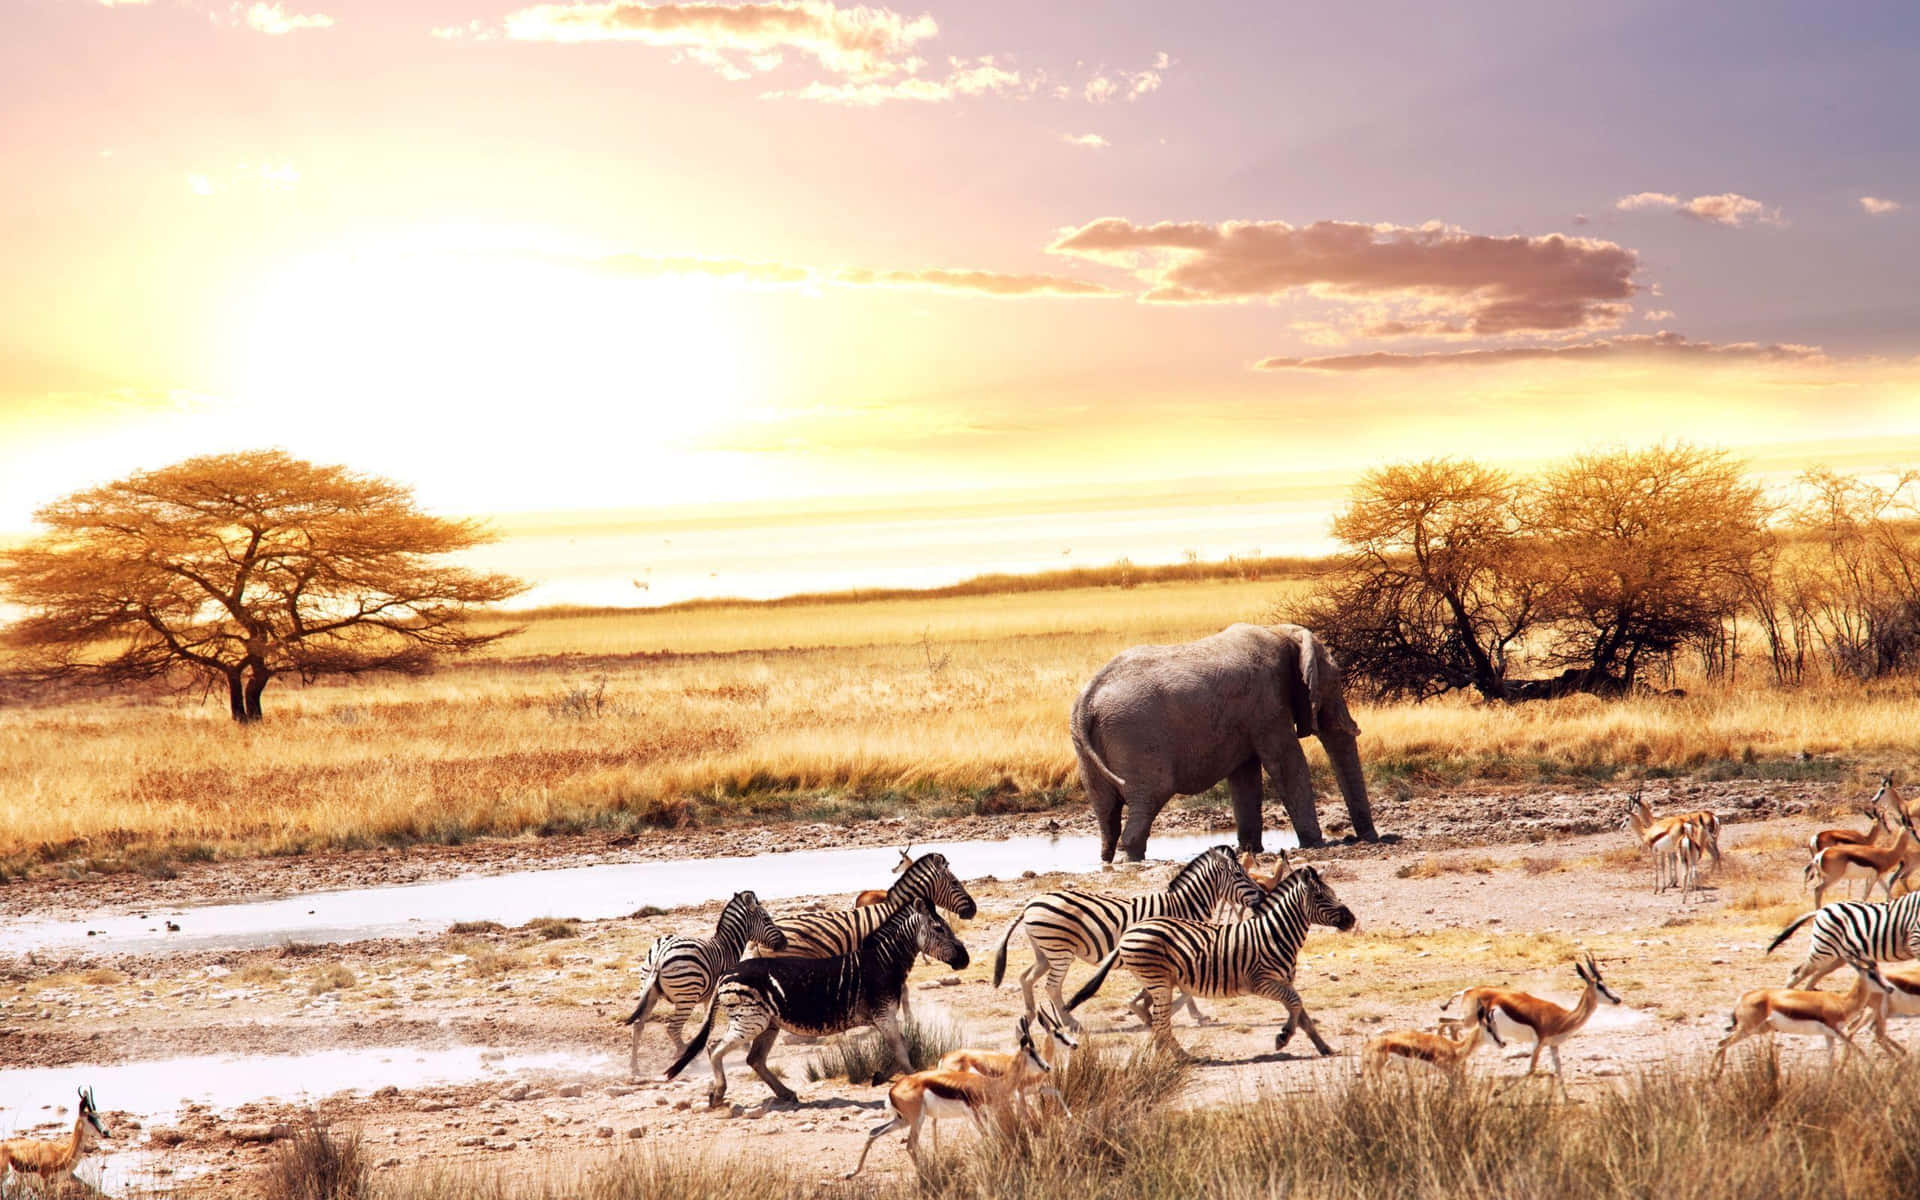 Explore the beauty of Africa